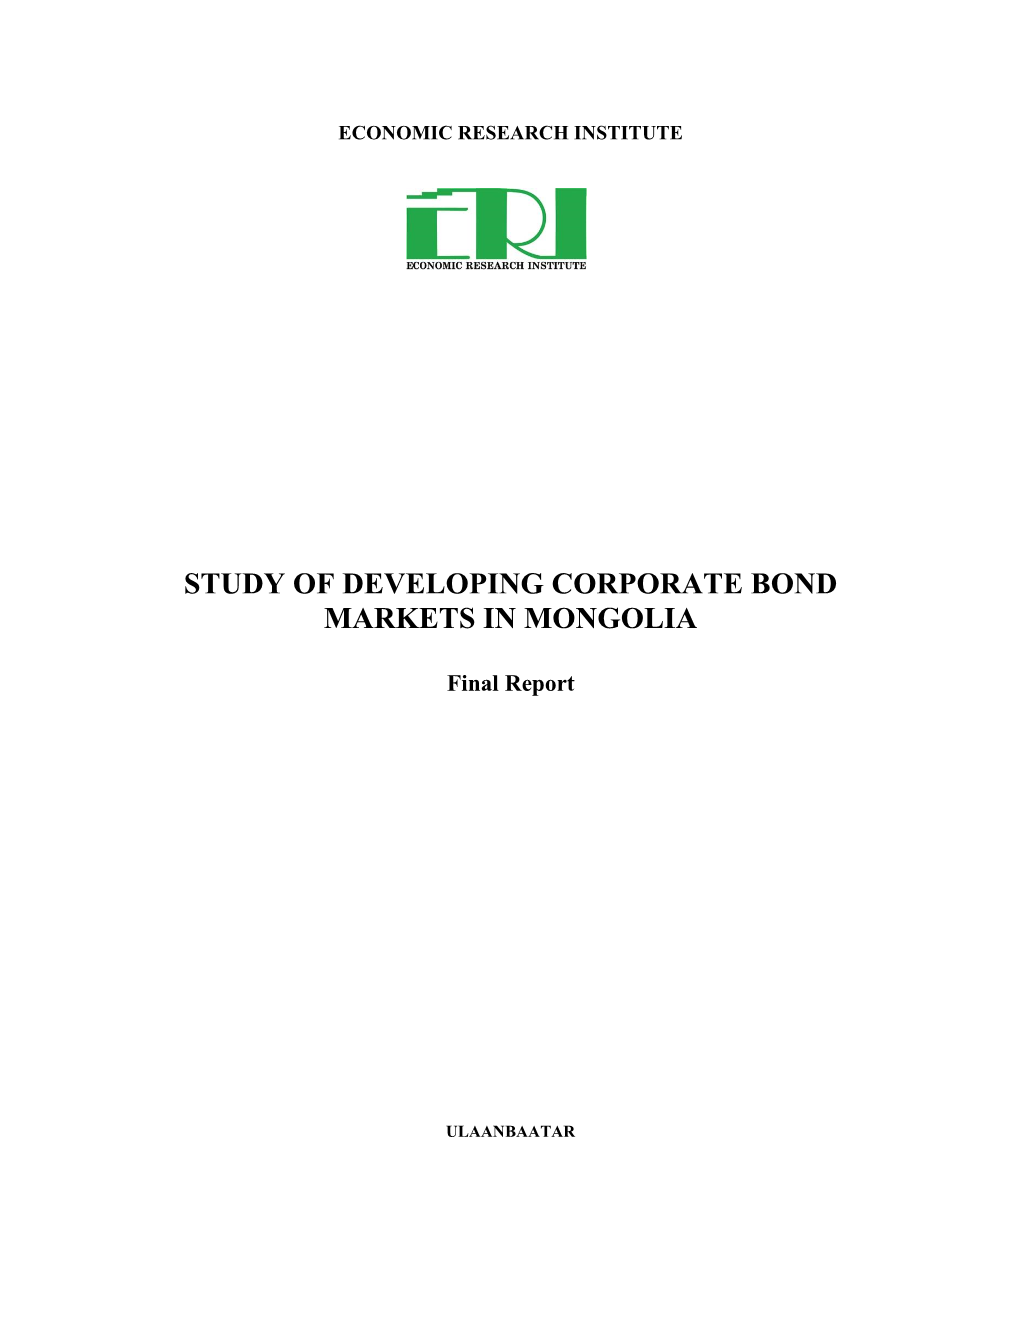 Study of Developing Corporate Bond Markets in Mongolia